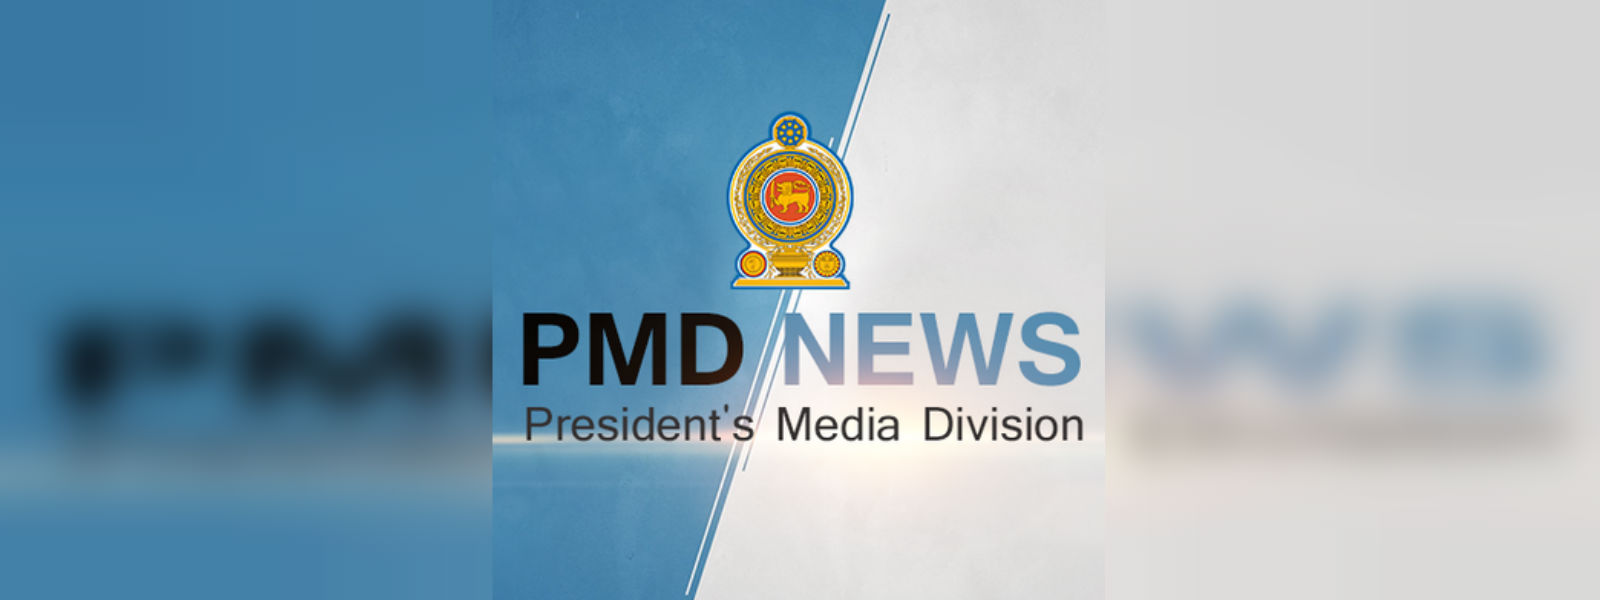 PMD says ‘Extremist Group’ behind unruly behavior